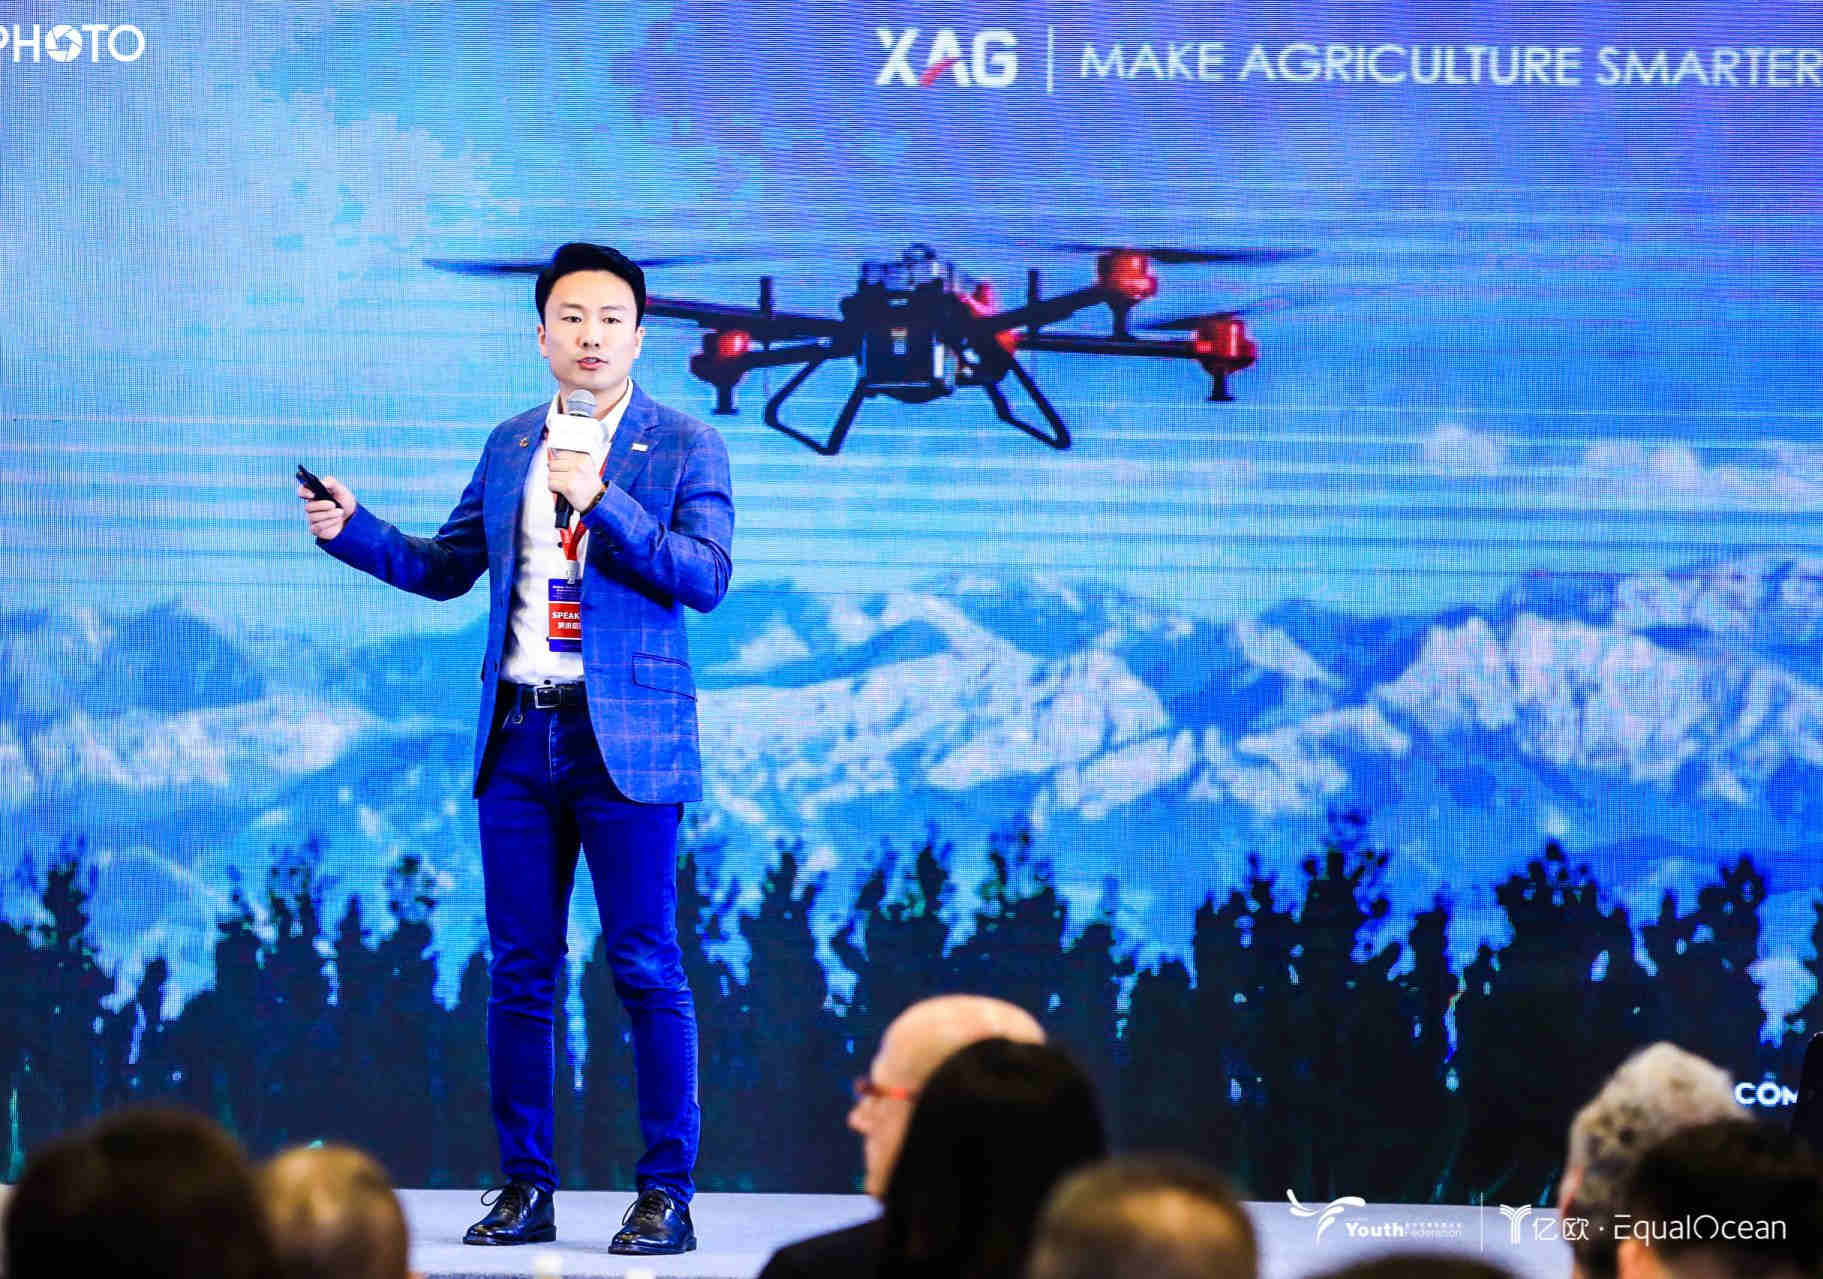 Beyond UAV: XAG Showcases its Intelligent Strength for Smart Agriculture at Global New Economy Conference 2019.